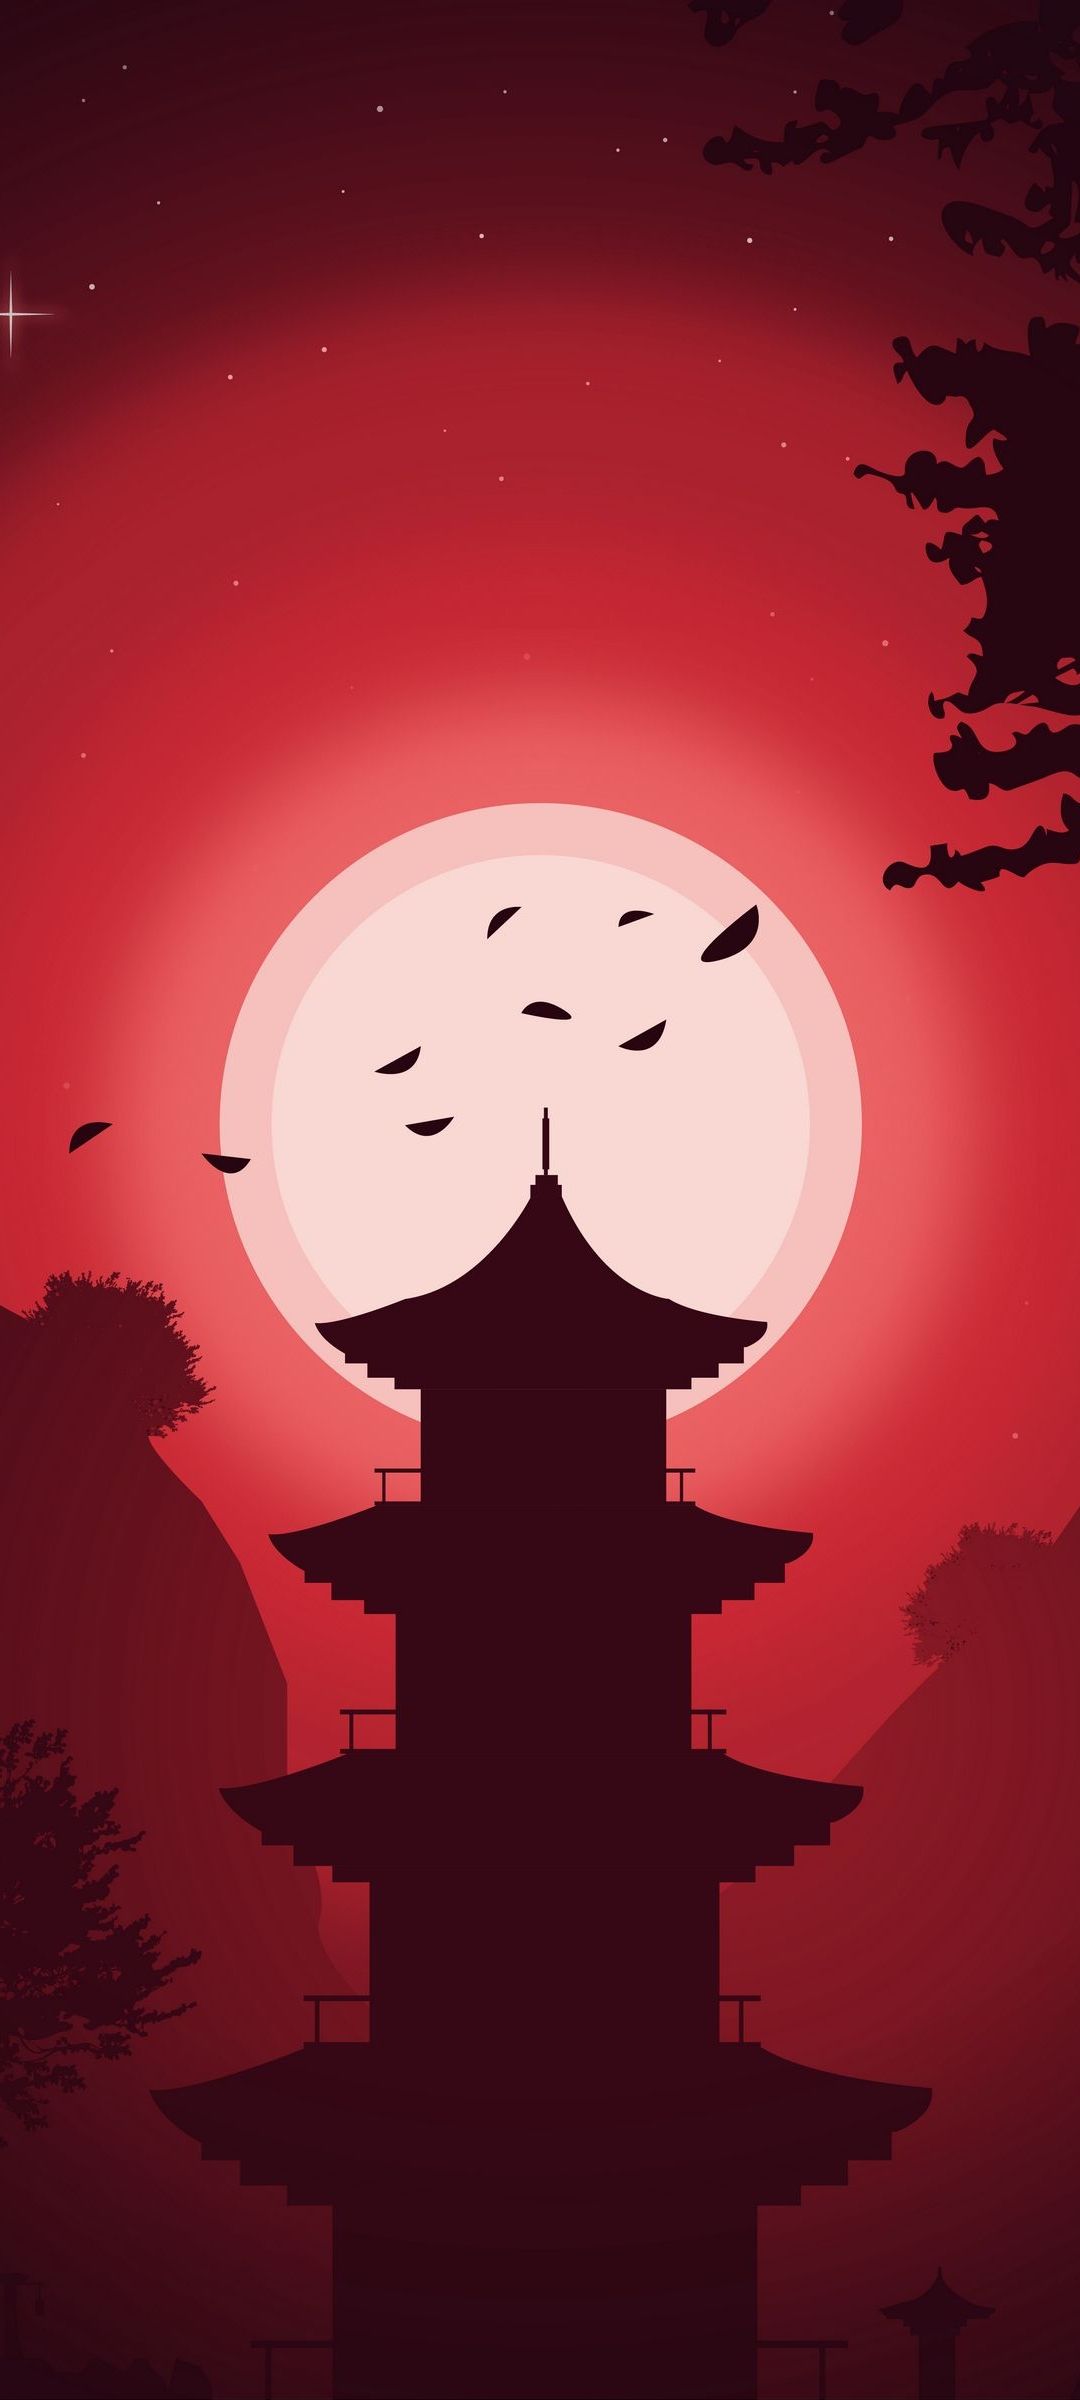 Red aesthetic wallpaper with a pagoda in front of a red moon - Horror